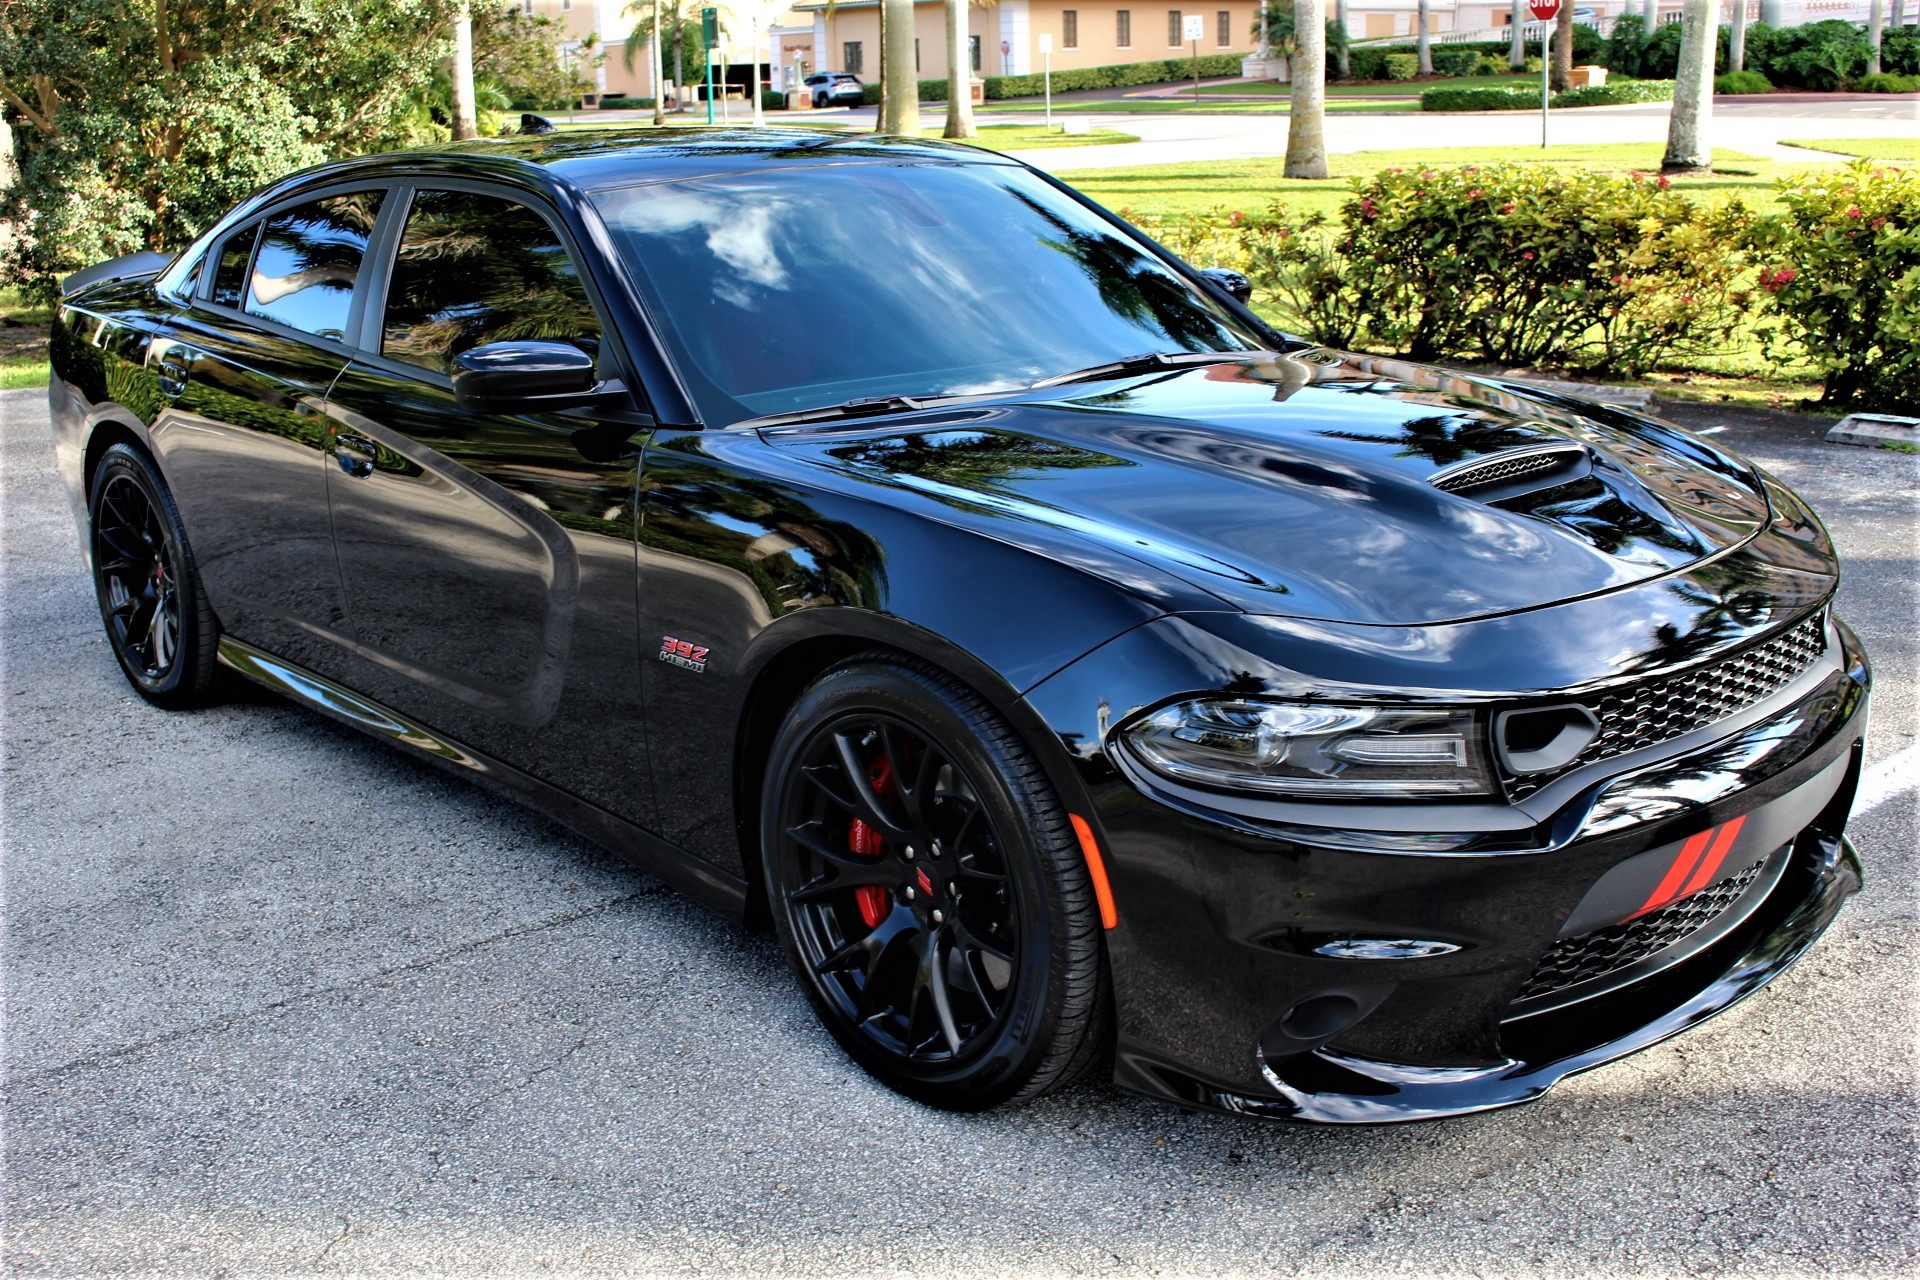 Used 2019 Dodge Charger R/T Scat Pack for sale Sold at The Gables Sports Cars in Miami FL 33146 2